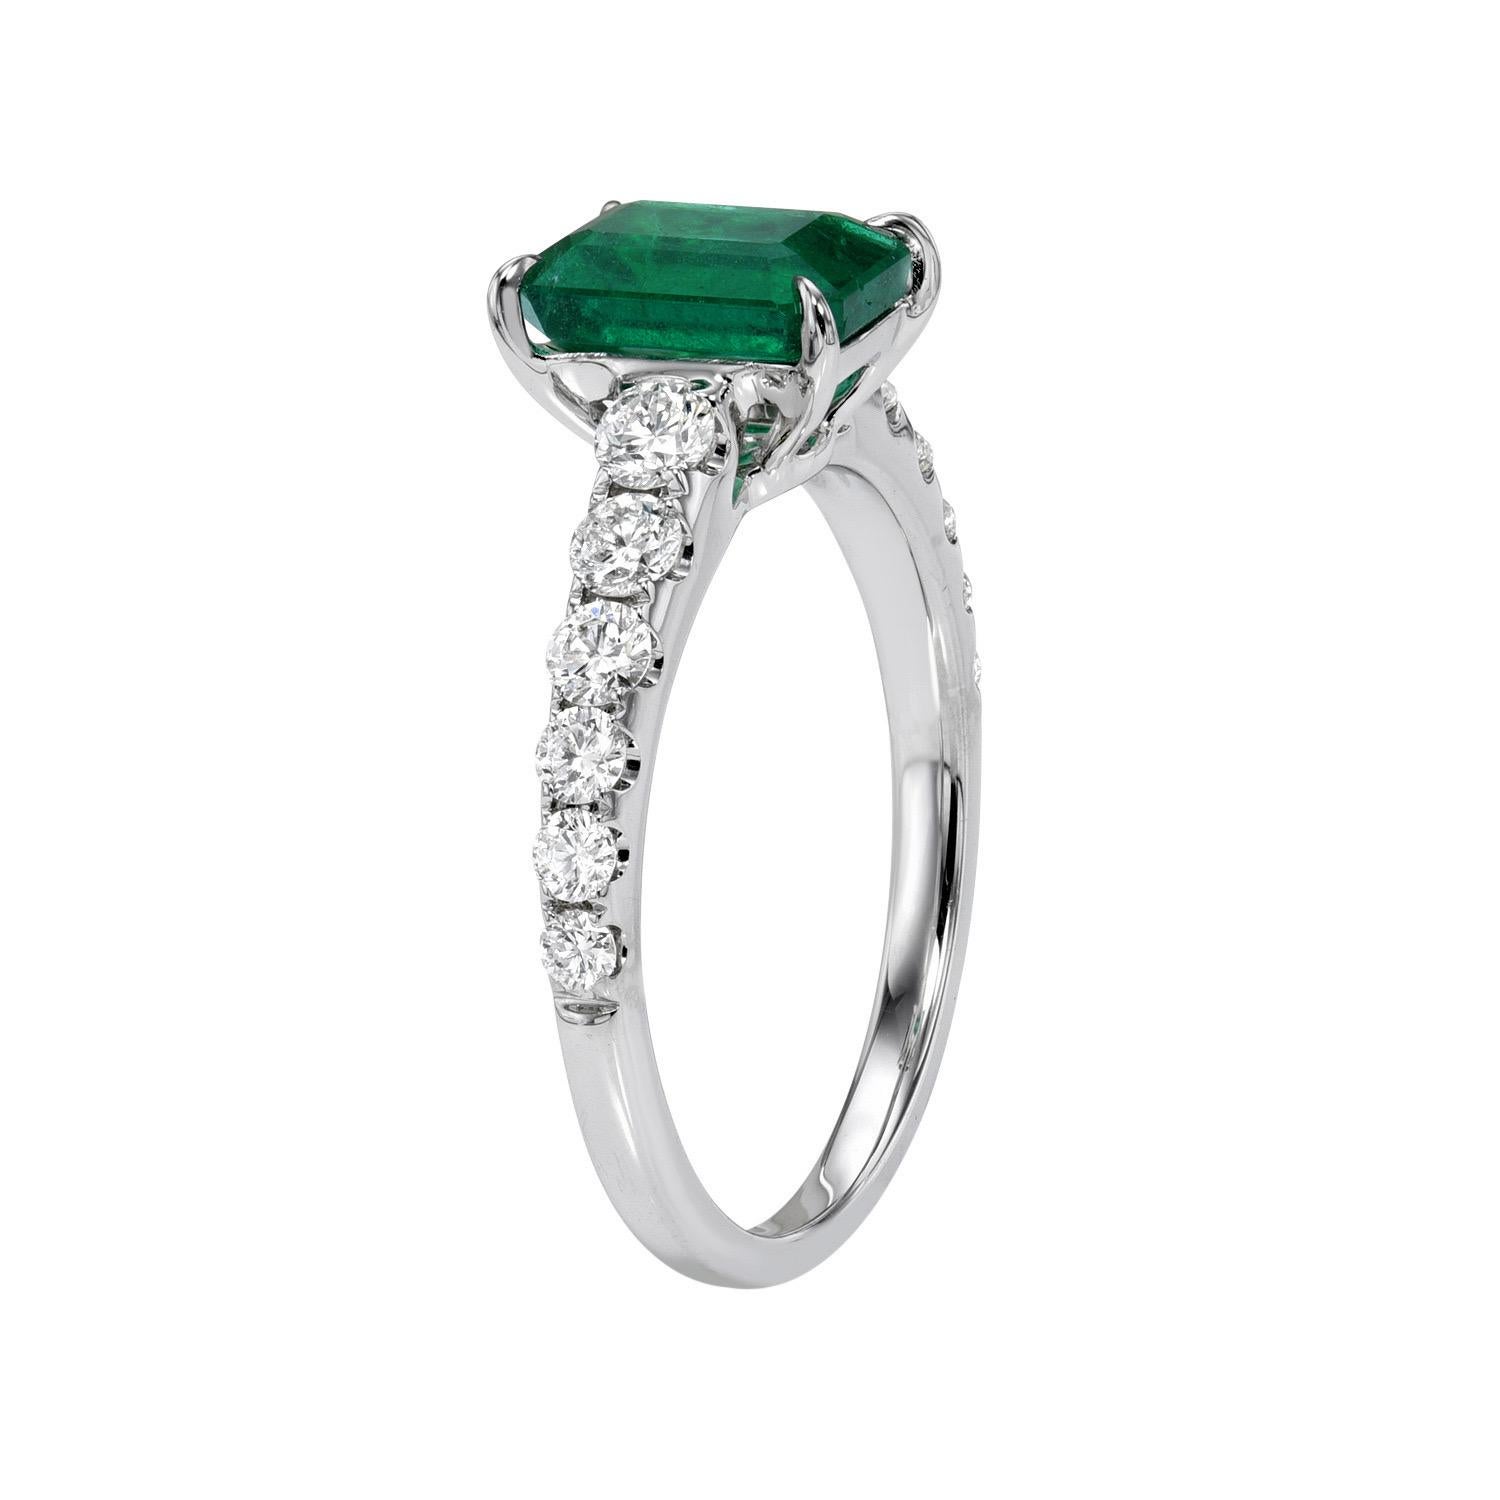 1.43 carat Emerald-Cut Emerald 18K white gold ring, decorated with round brilliant diamonds, F-G/VS, totaling 0.63 carats.
Ring size 6.5. Resizing is complementary upon request.
Returns are accepted and paid by us within 7 days of delivery.